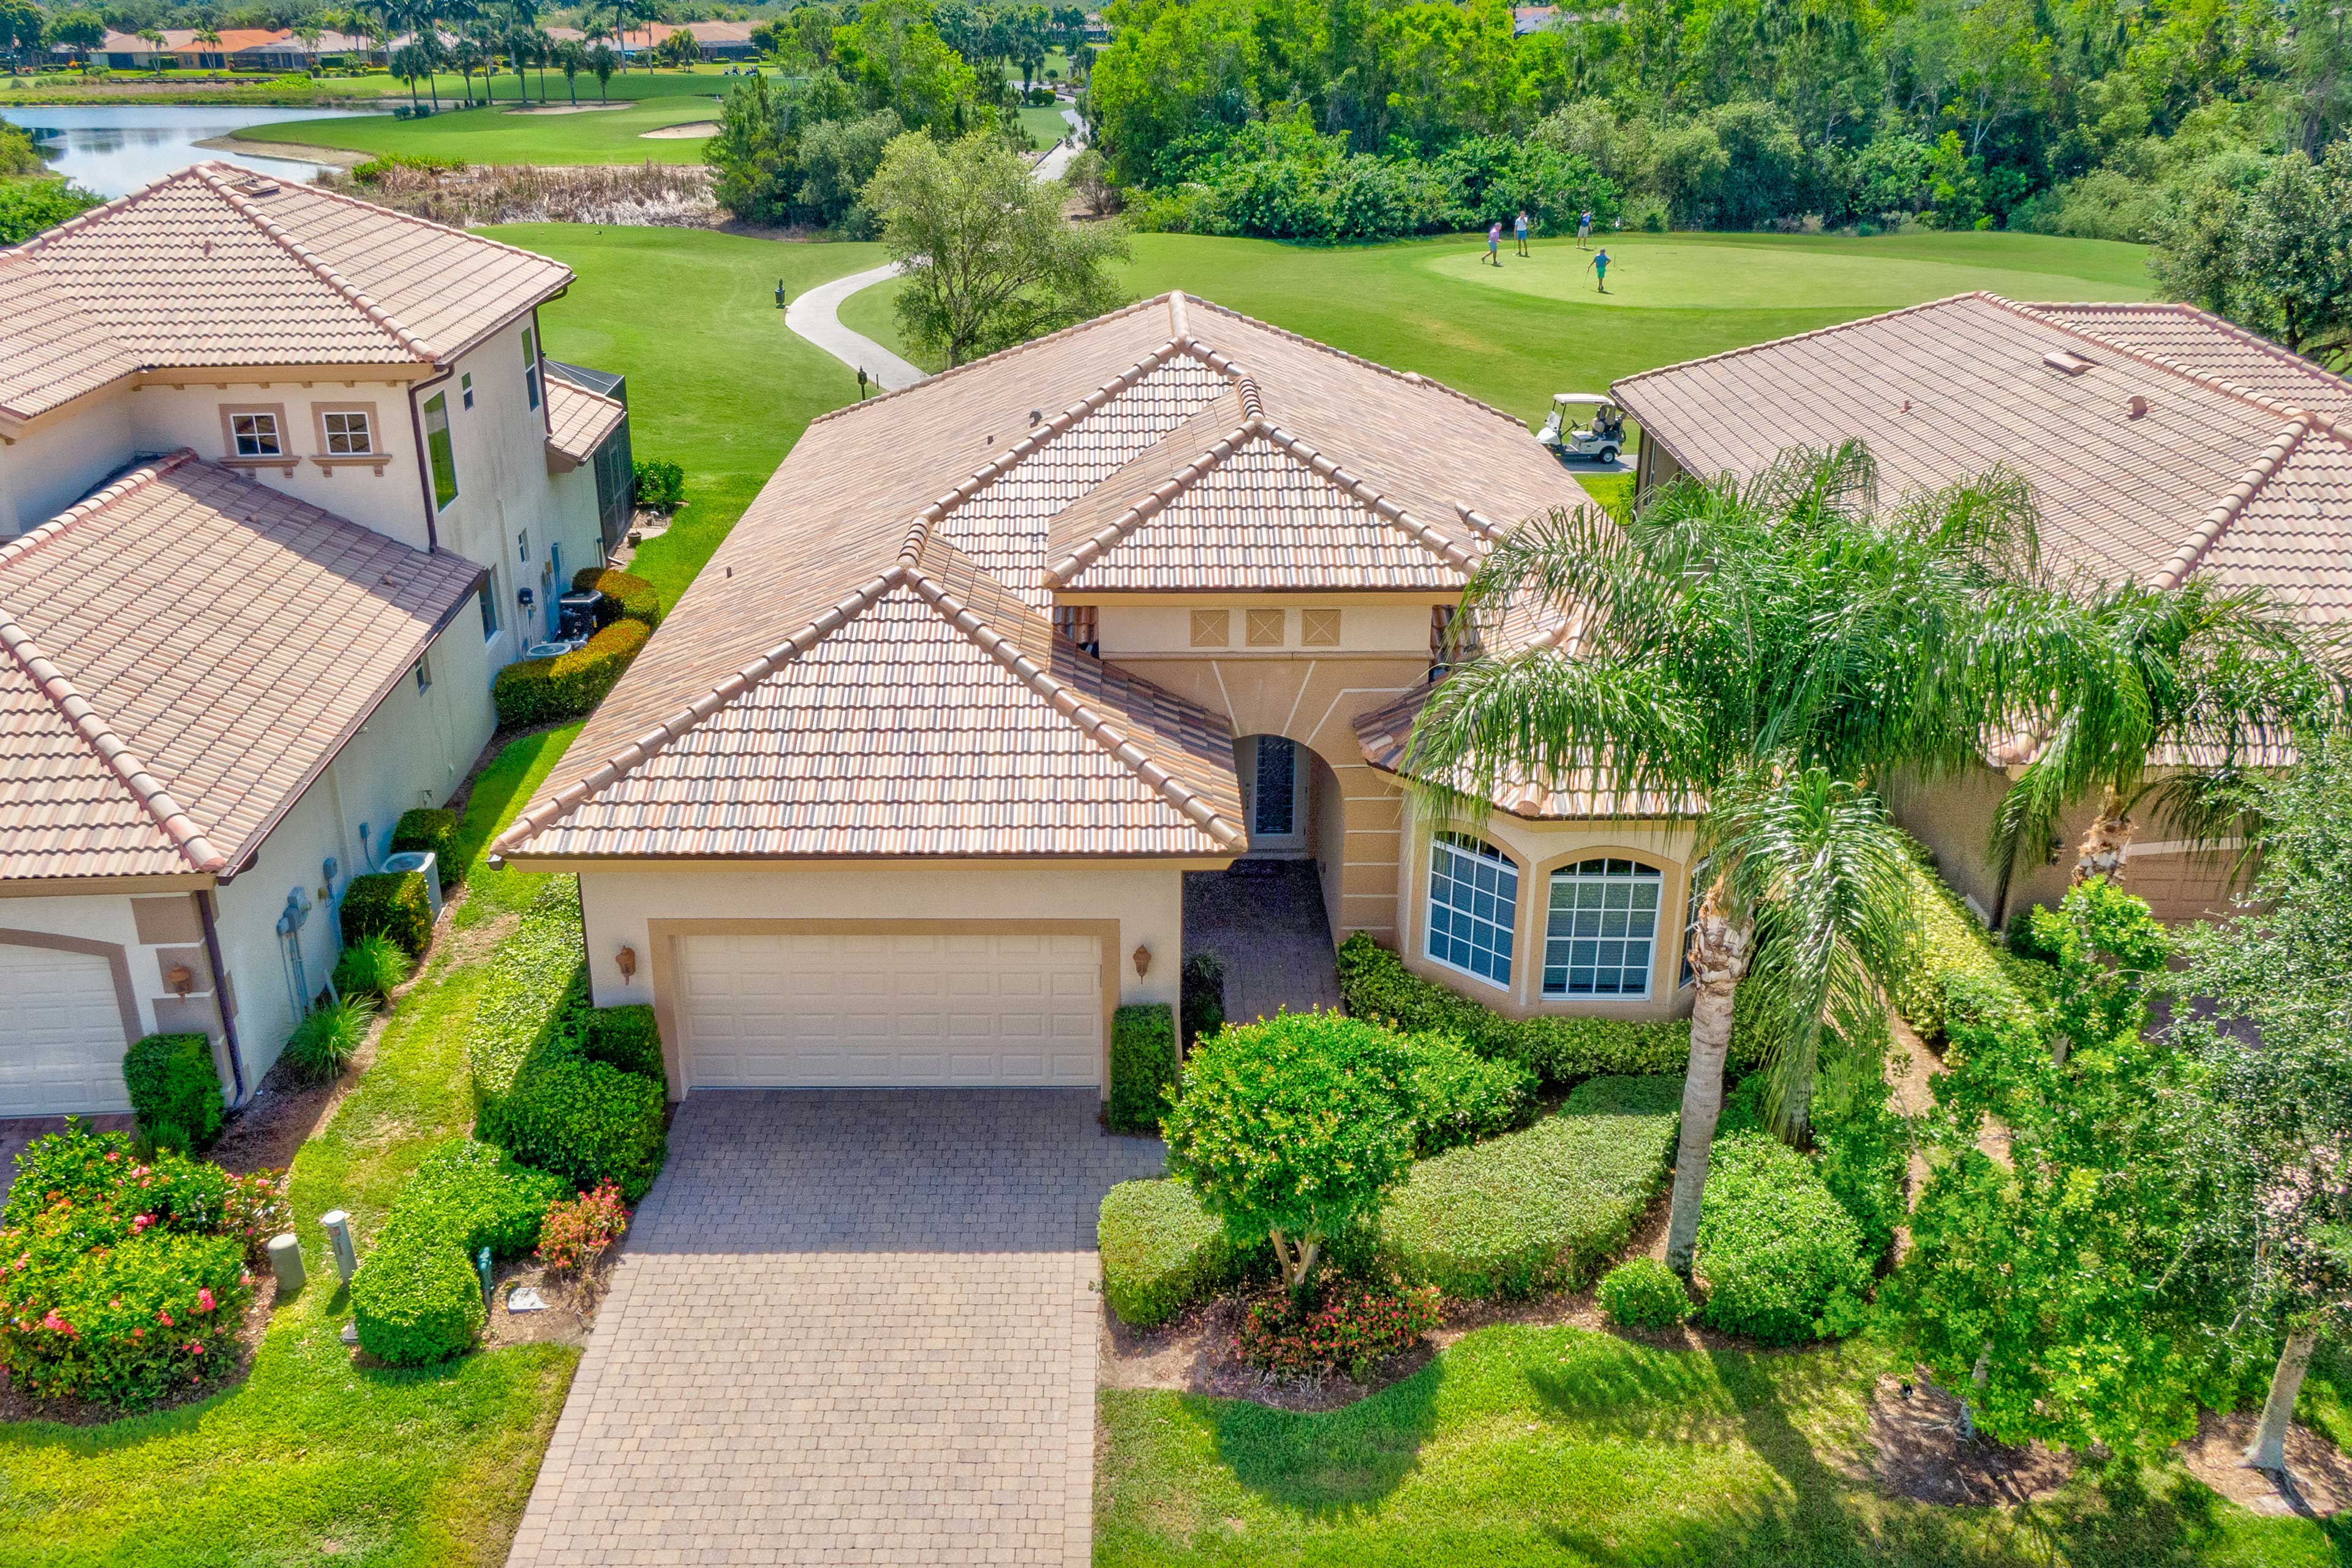 The golfers in the group will love staying at this spacious abode!